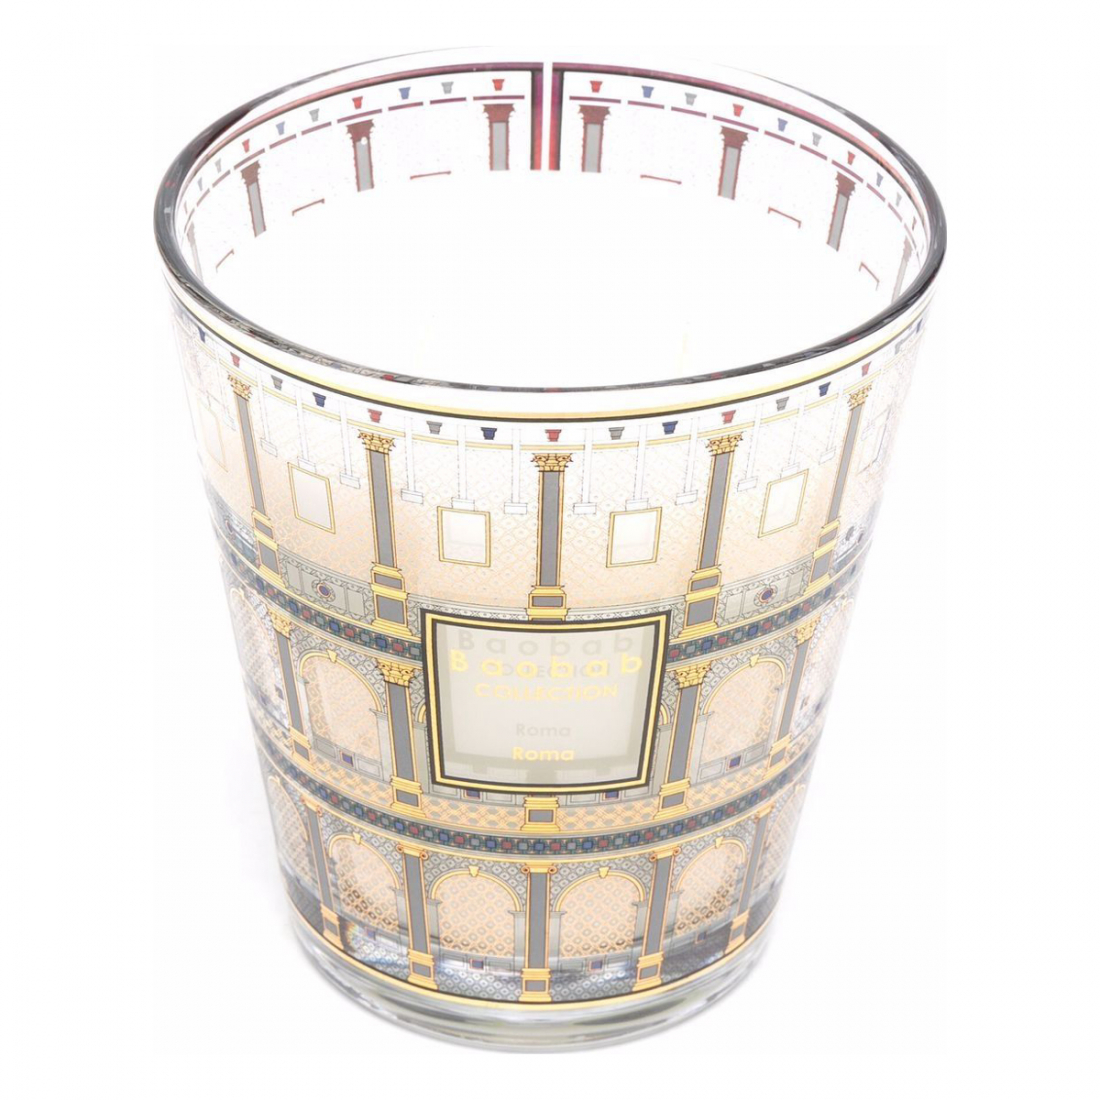 'Cities Roma' Candle - 1100 g